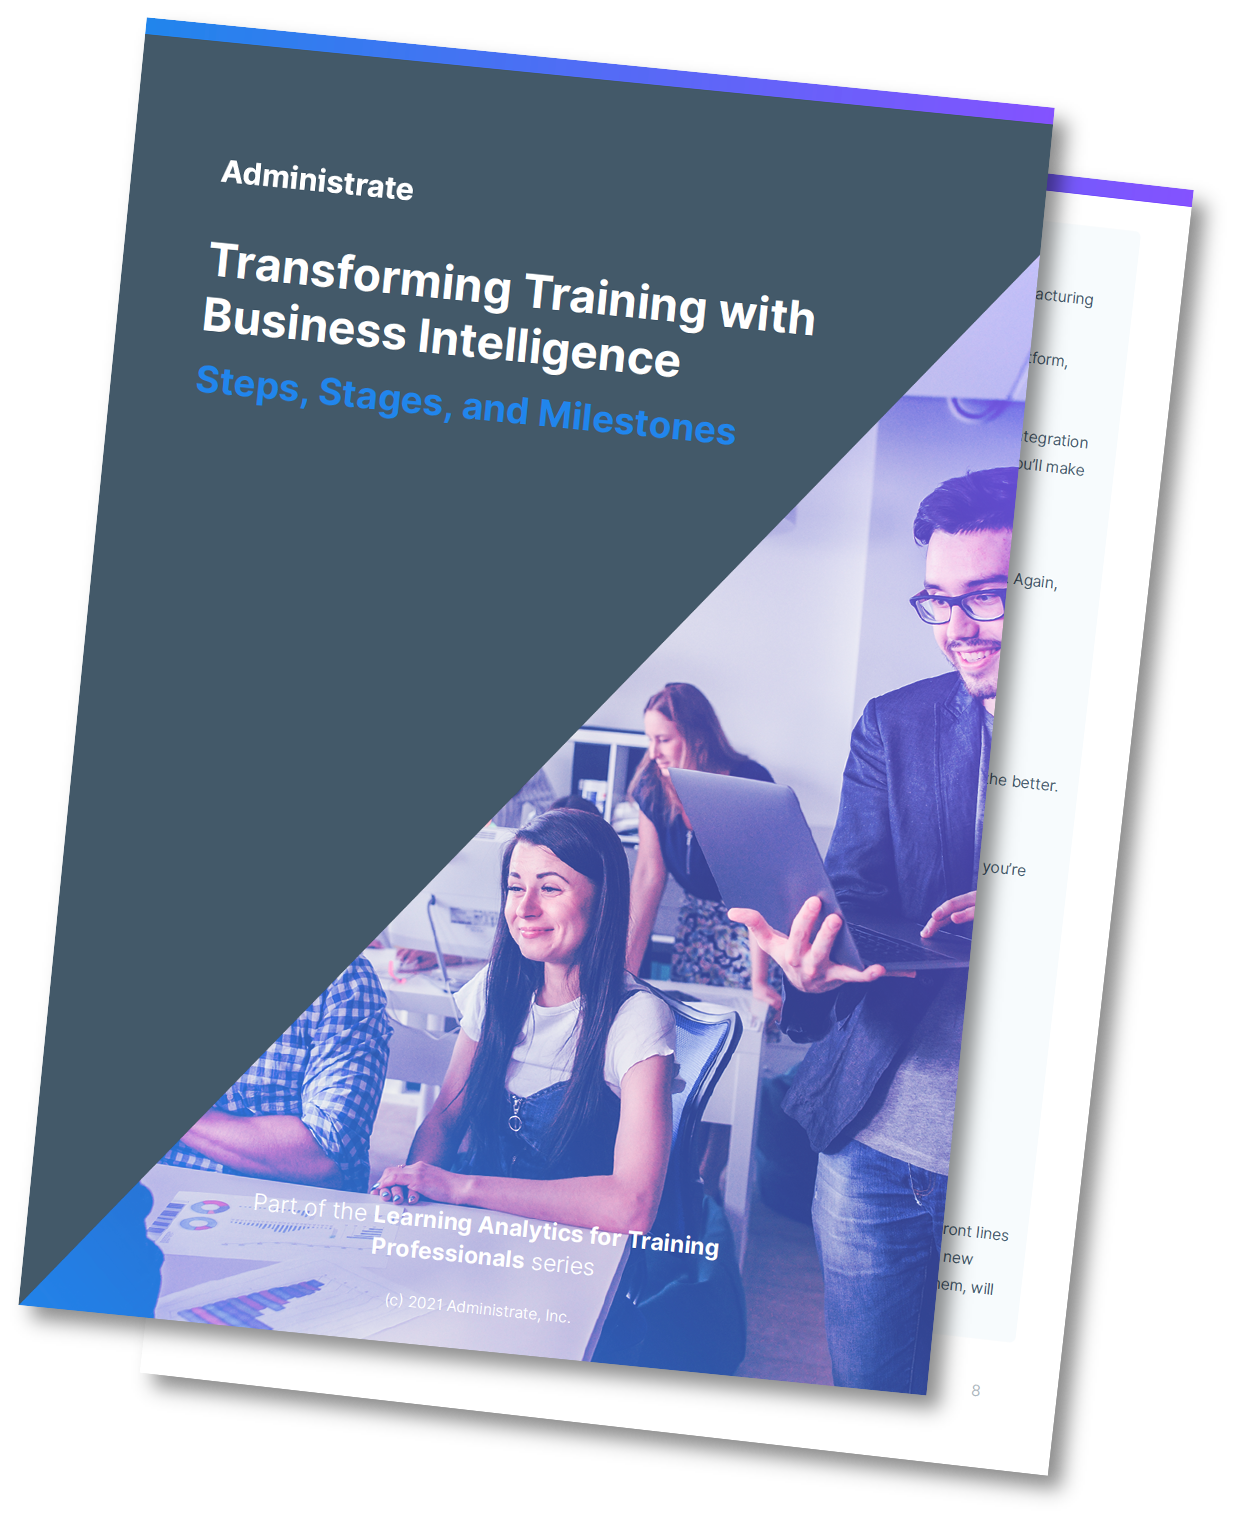 Explore how you can transform your training program with Business Intelligence for enterprise training, in this guide.